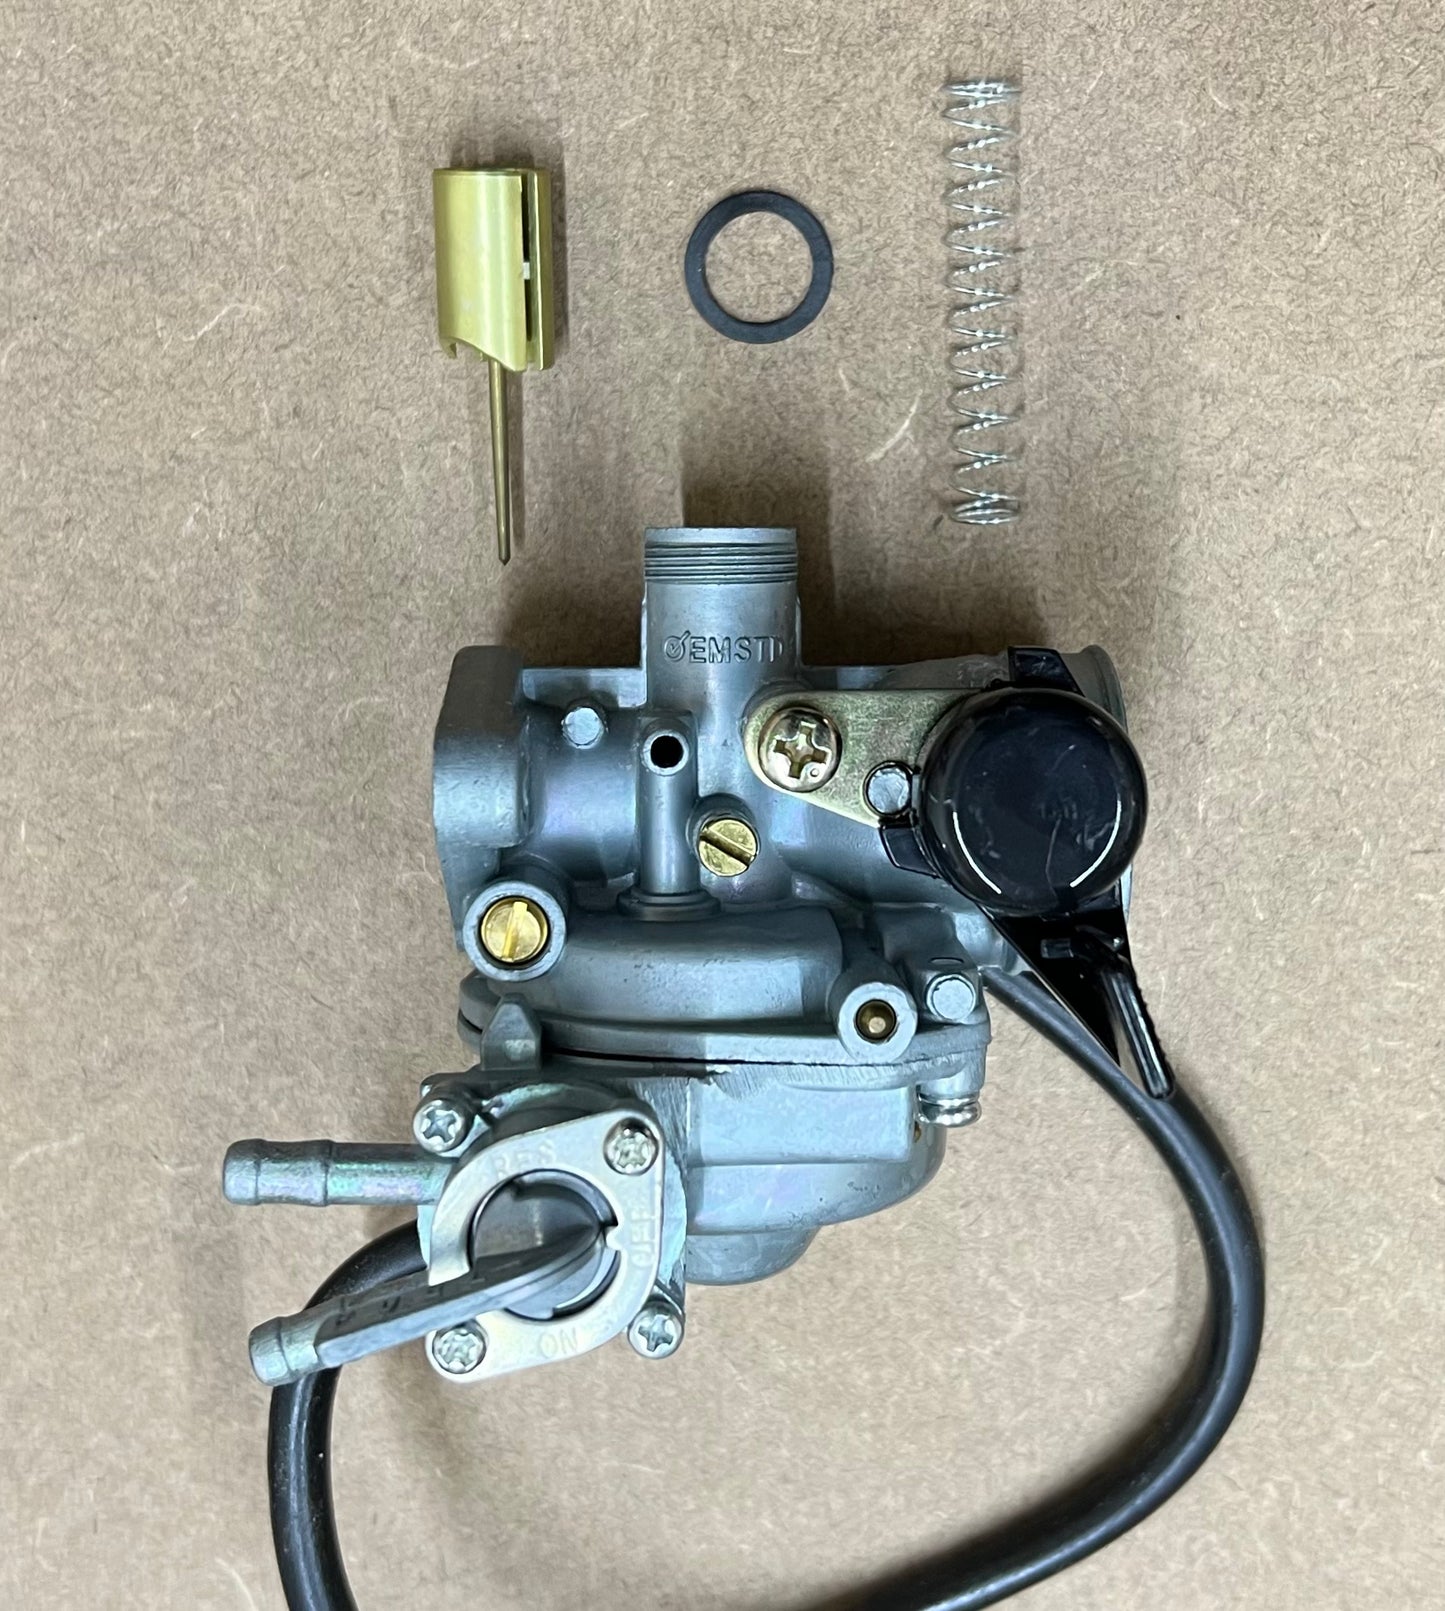 Reproduction carb (78-85 atc70 and trx70)